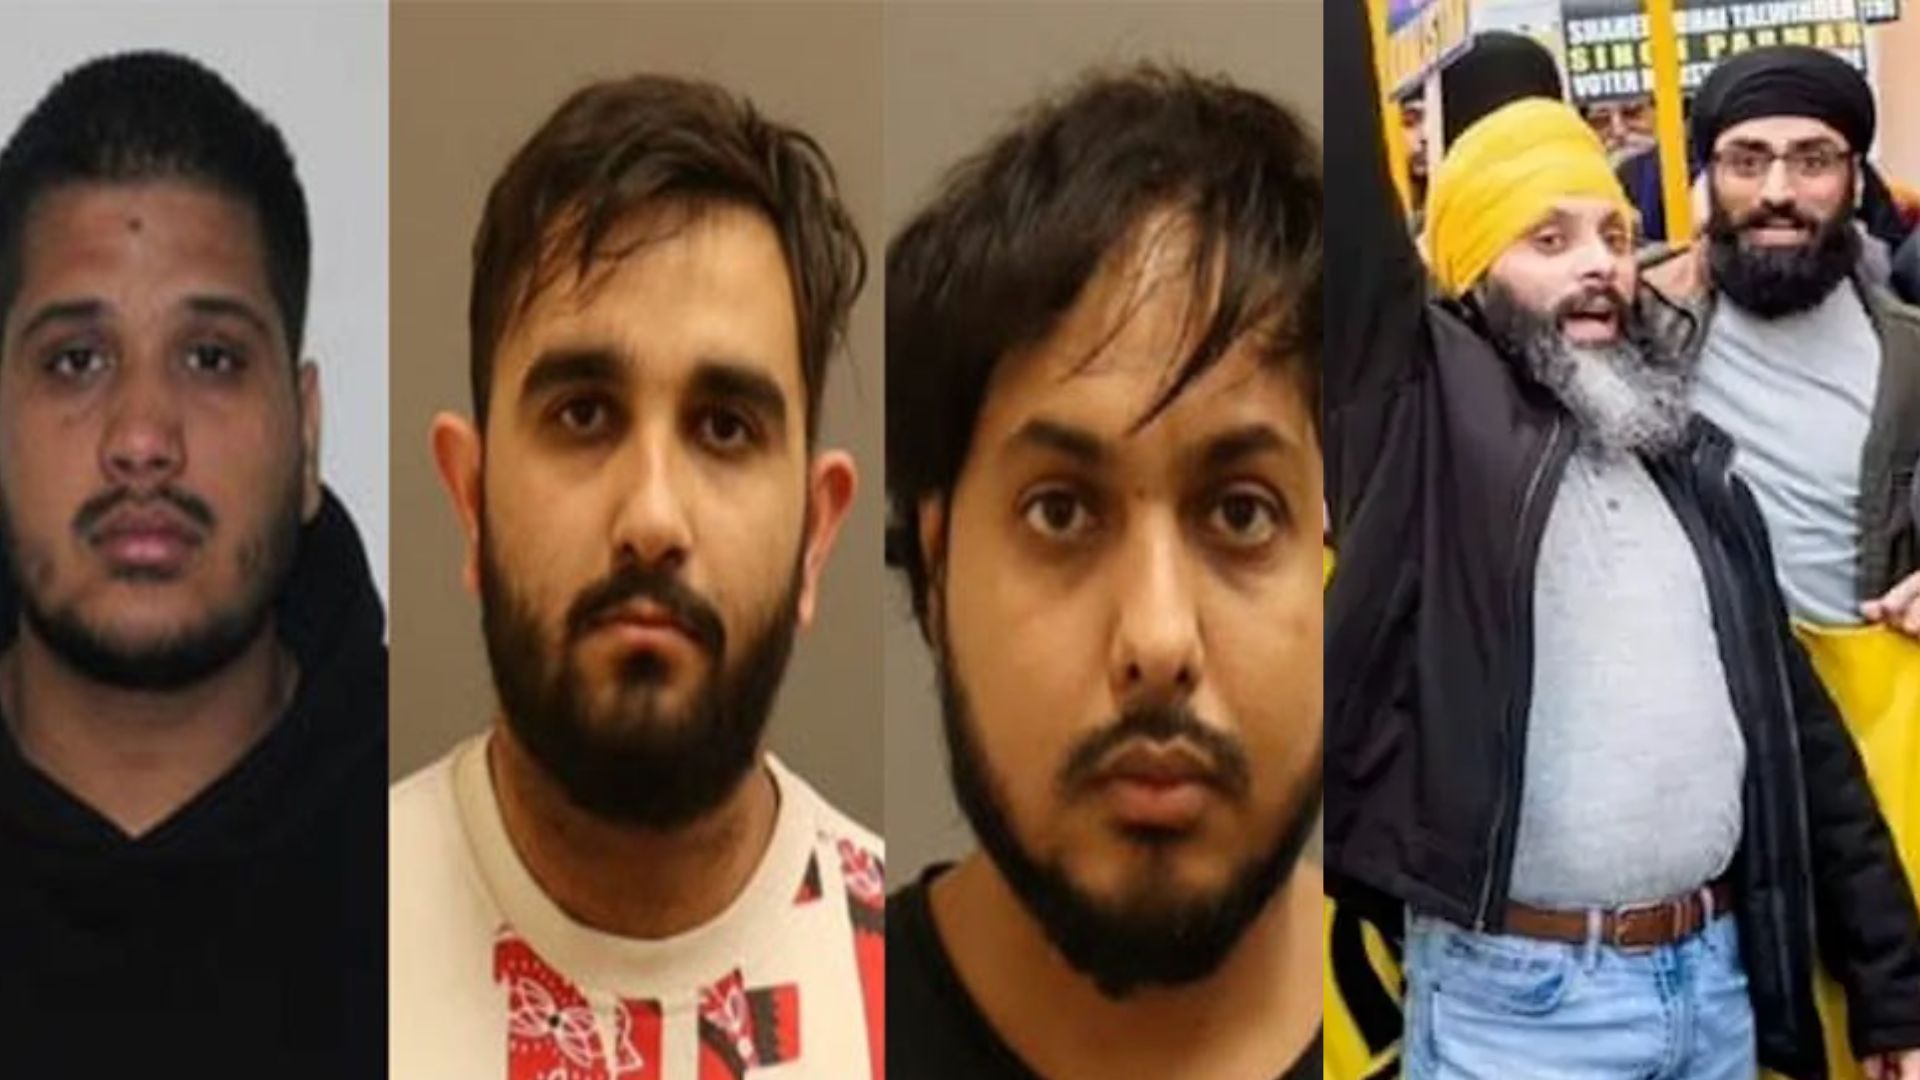 Nijjar murder Case: Canada Police Statement On Three Detained Accused, Here Are Key Points